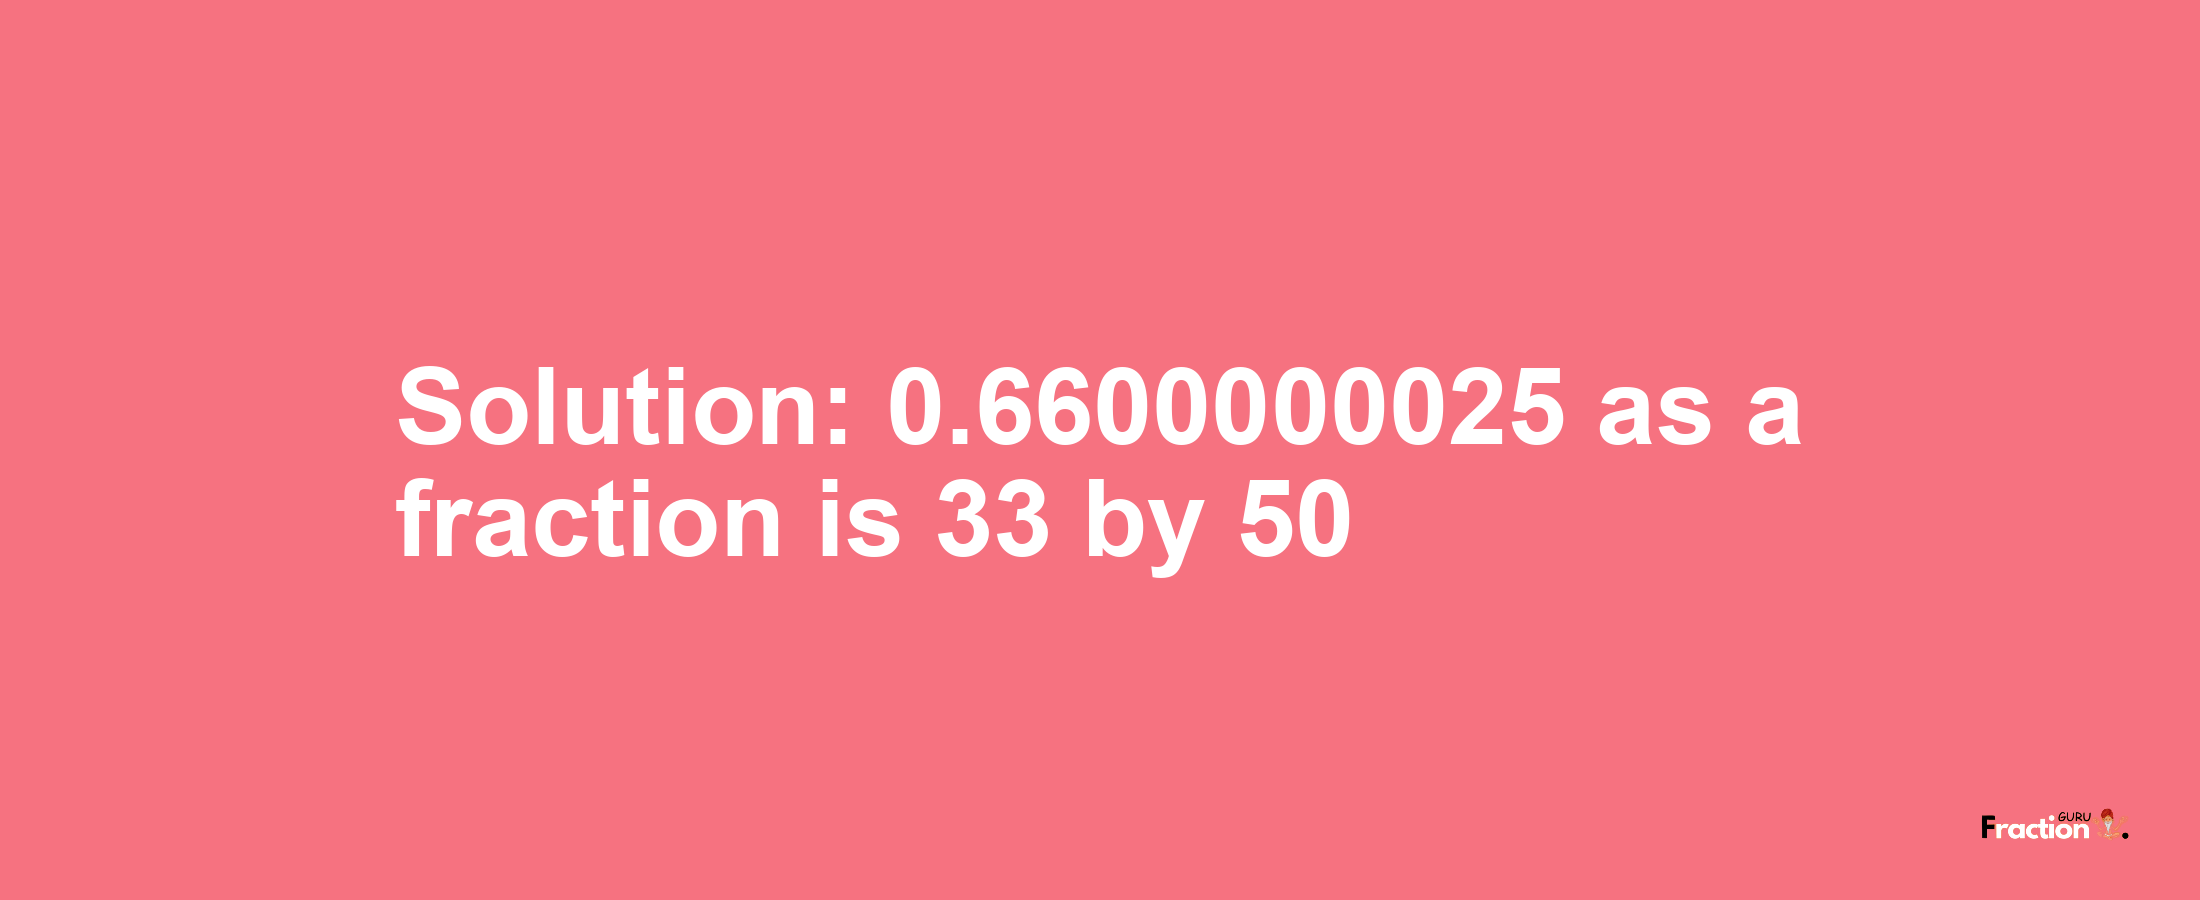 Solution:0.6600000025 as a fraction is 33/50